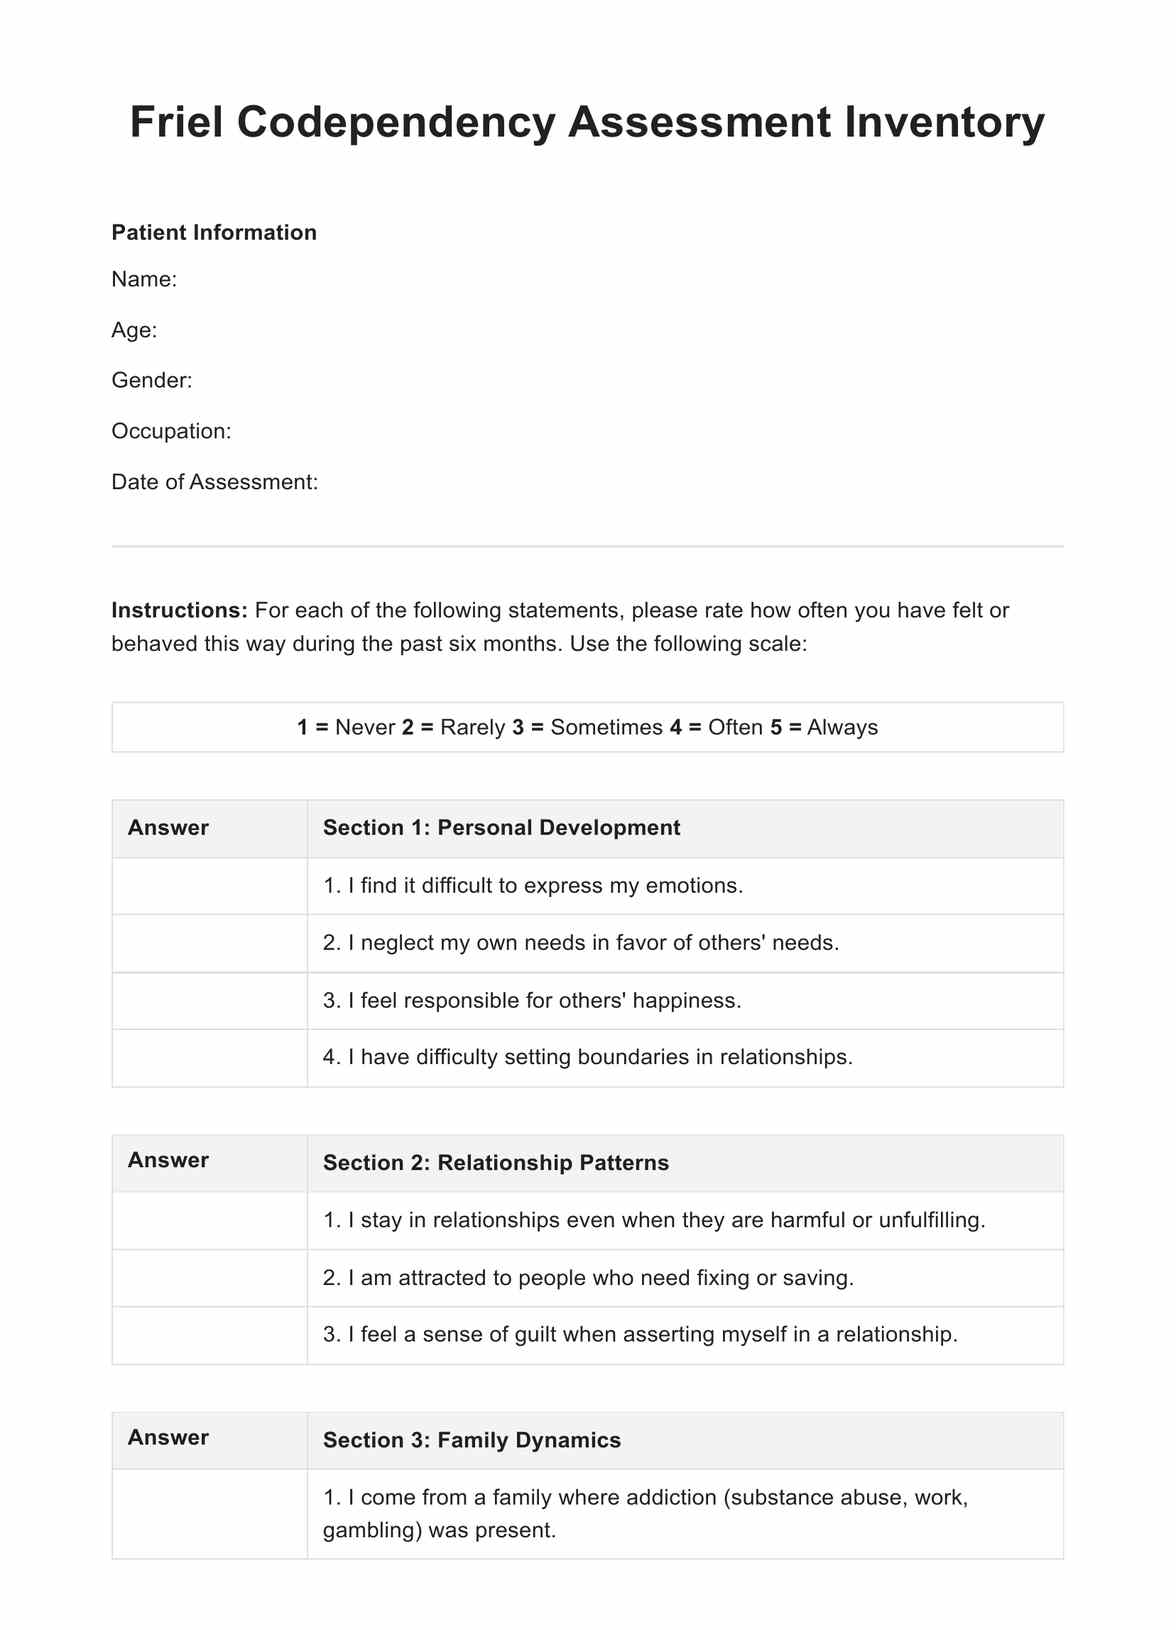 Friel Codependency Assessment Inventory PDF Example